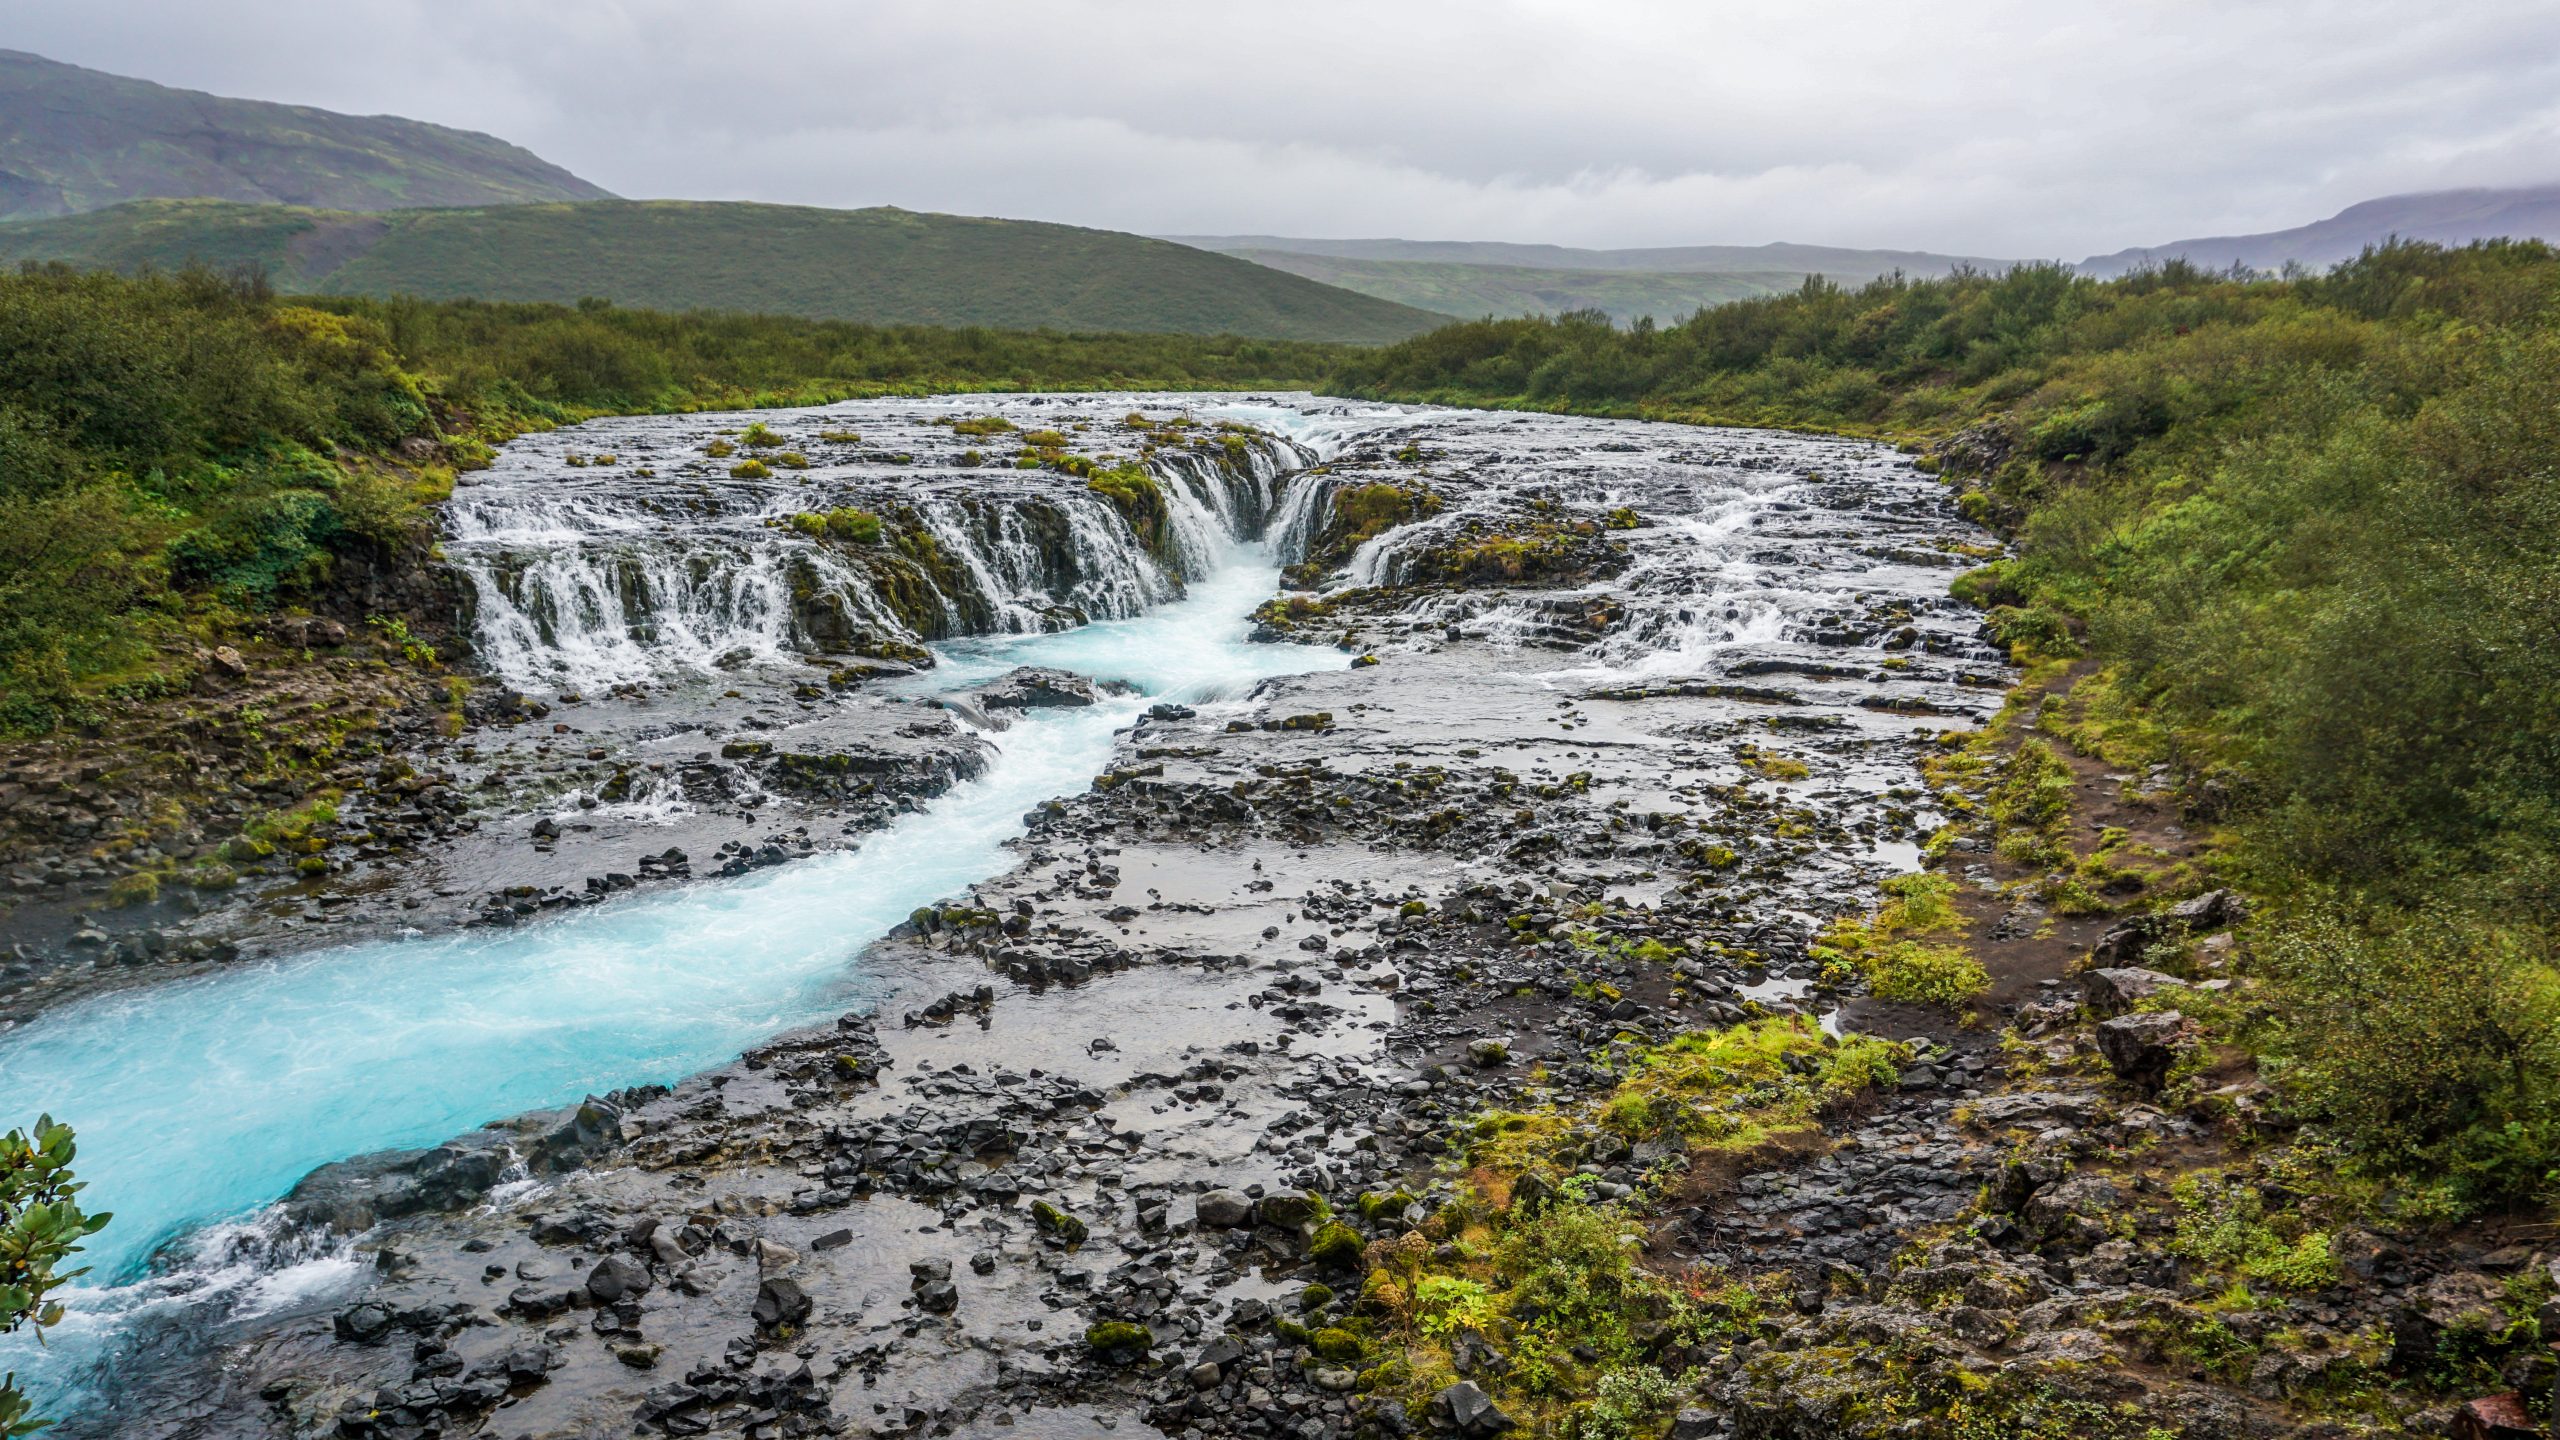 A waterfall with light blue colour and many branches in Iceland's Golden Circle region